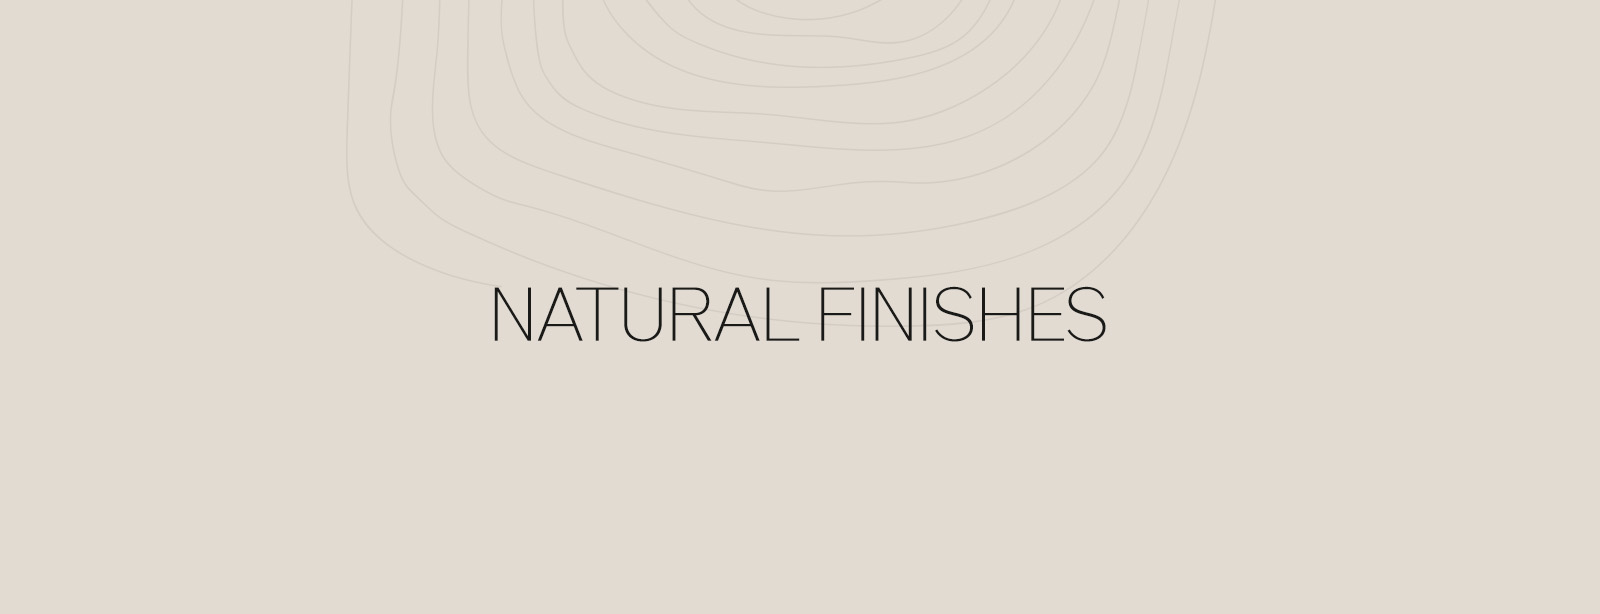 Natural Finishes